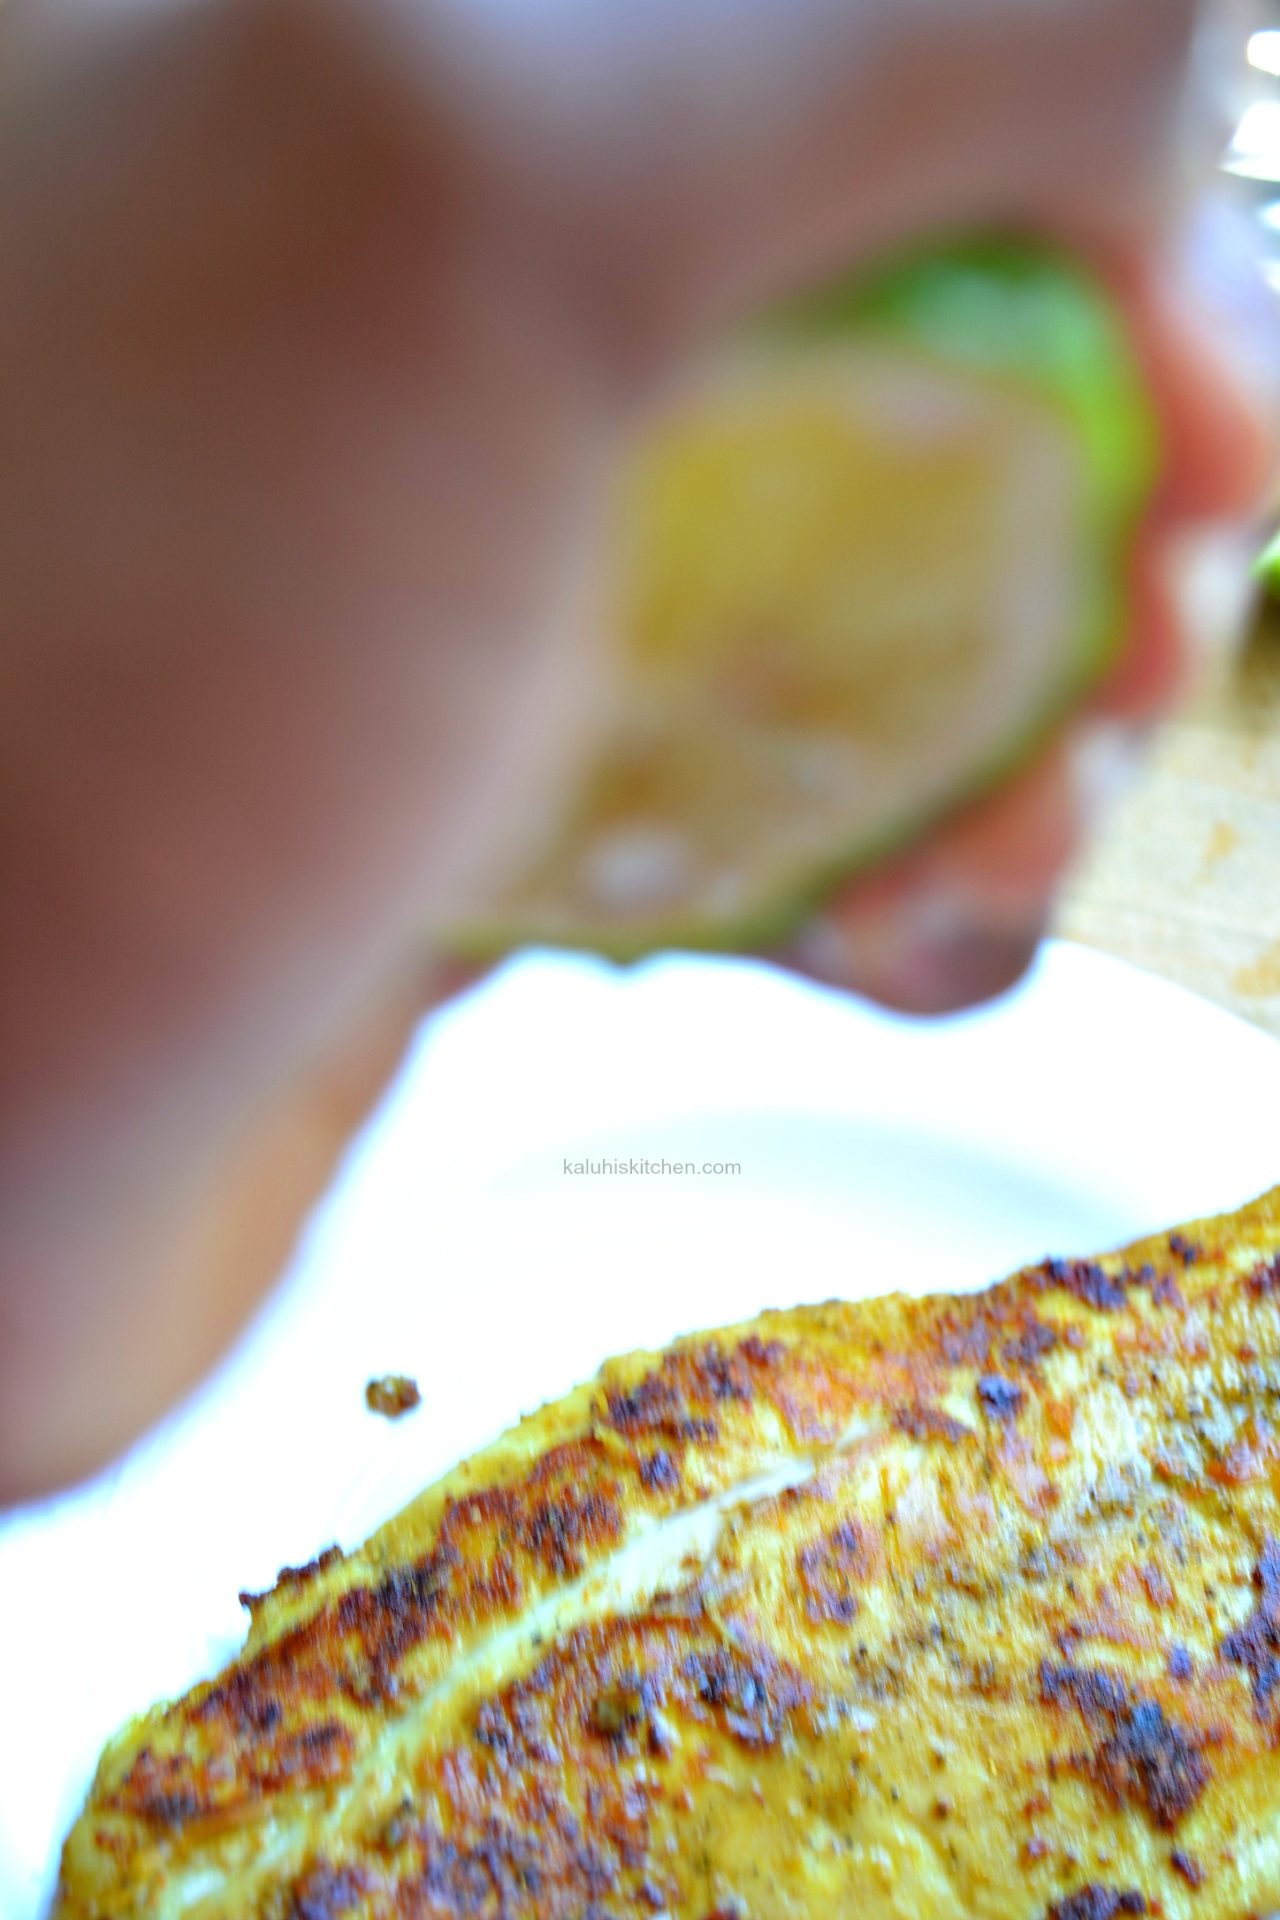 After the fish is done, squeeze a generous spritz of lemon juice over it and allow it to soak on and serve the fish masala_kaluhiskitchen.com